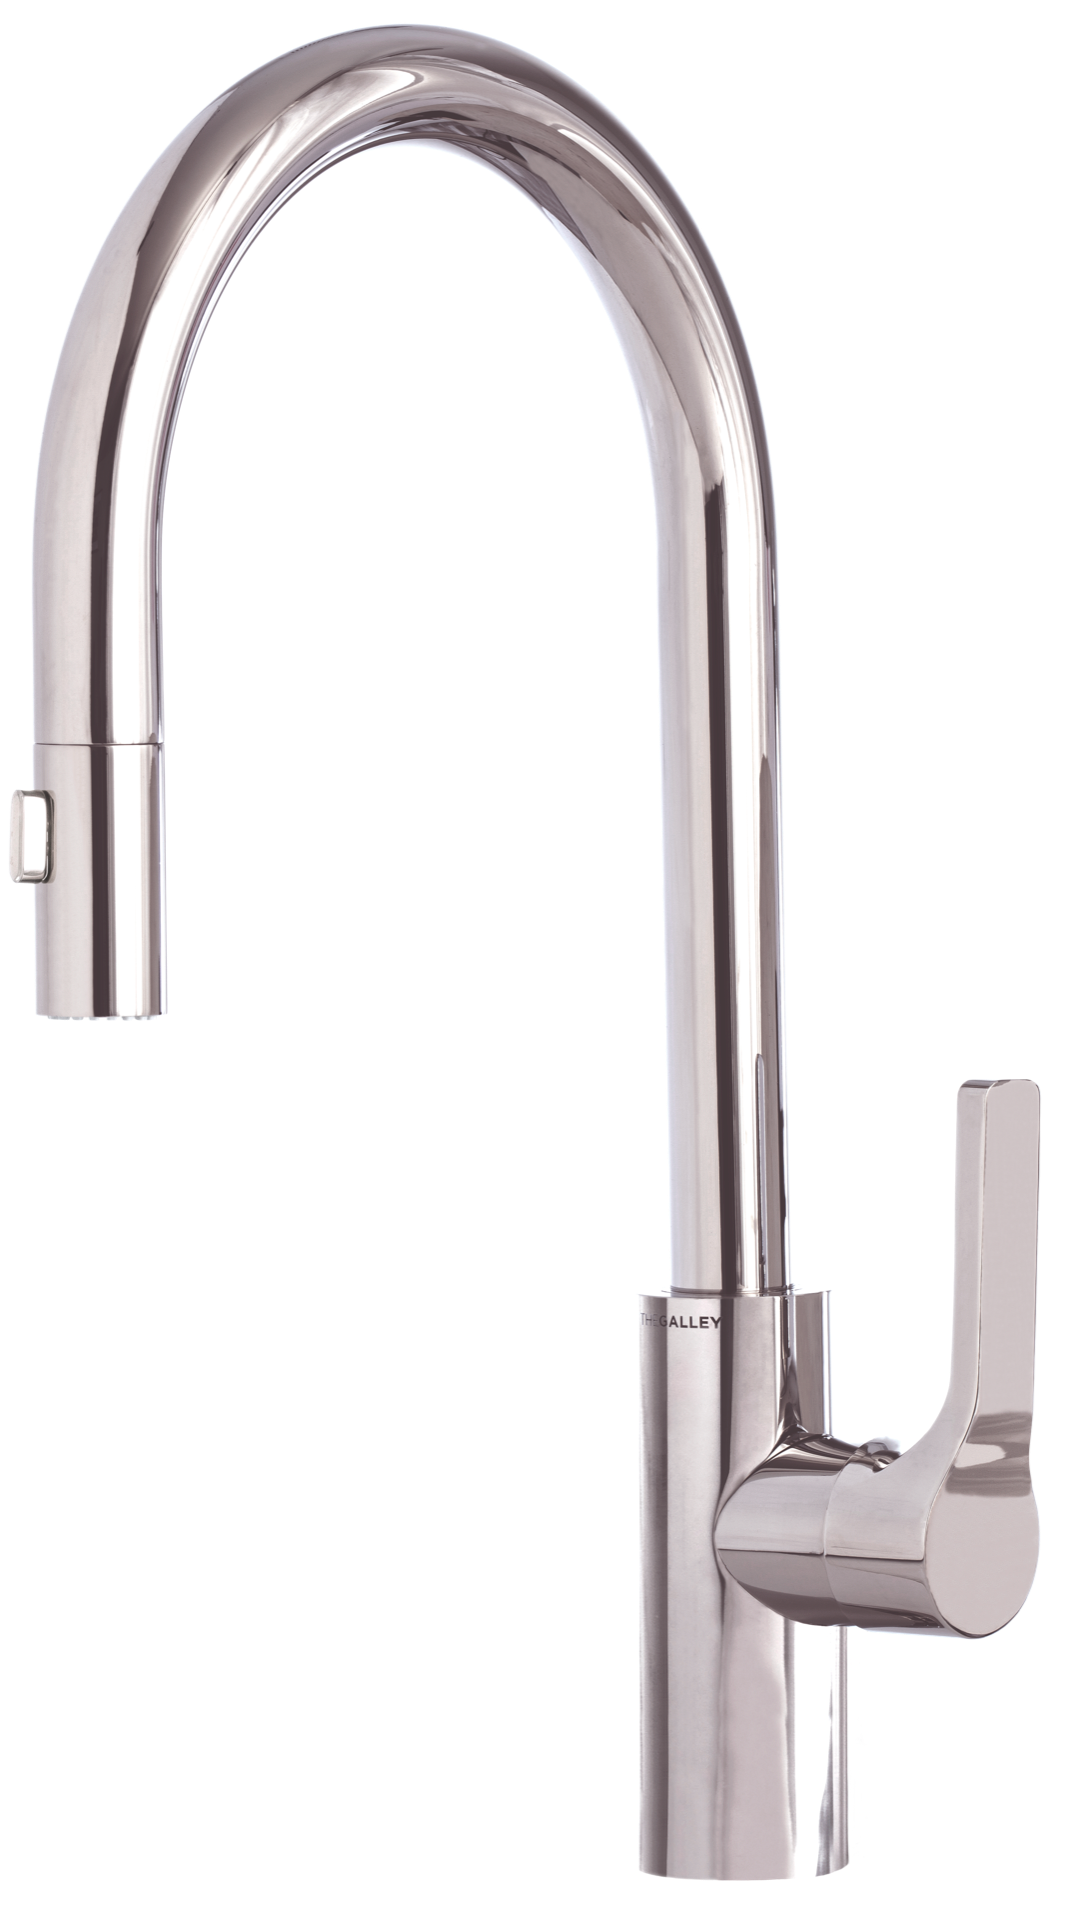 The Galley Ideal Tap Eco Flow with Water Filtration System